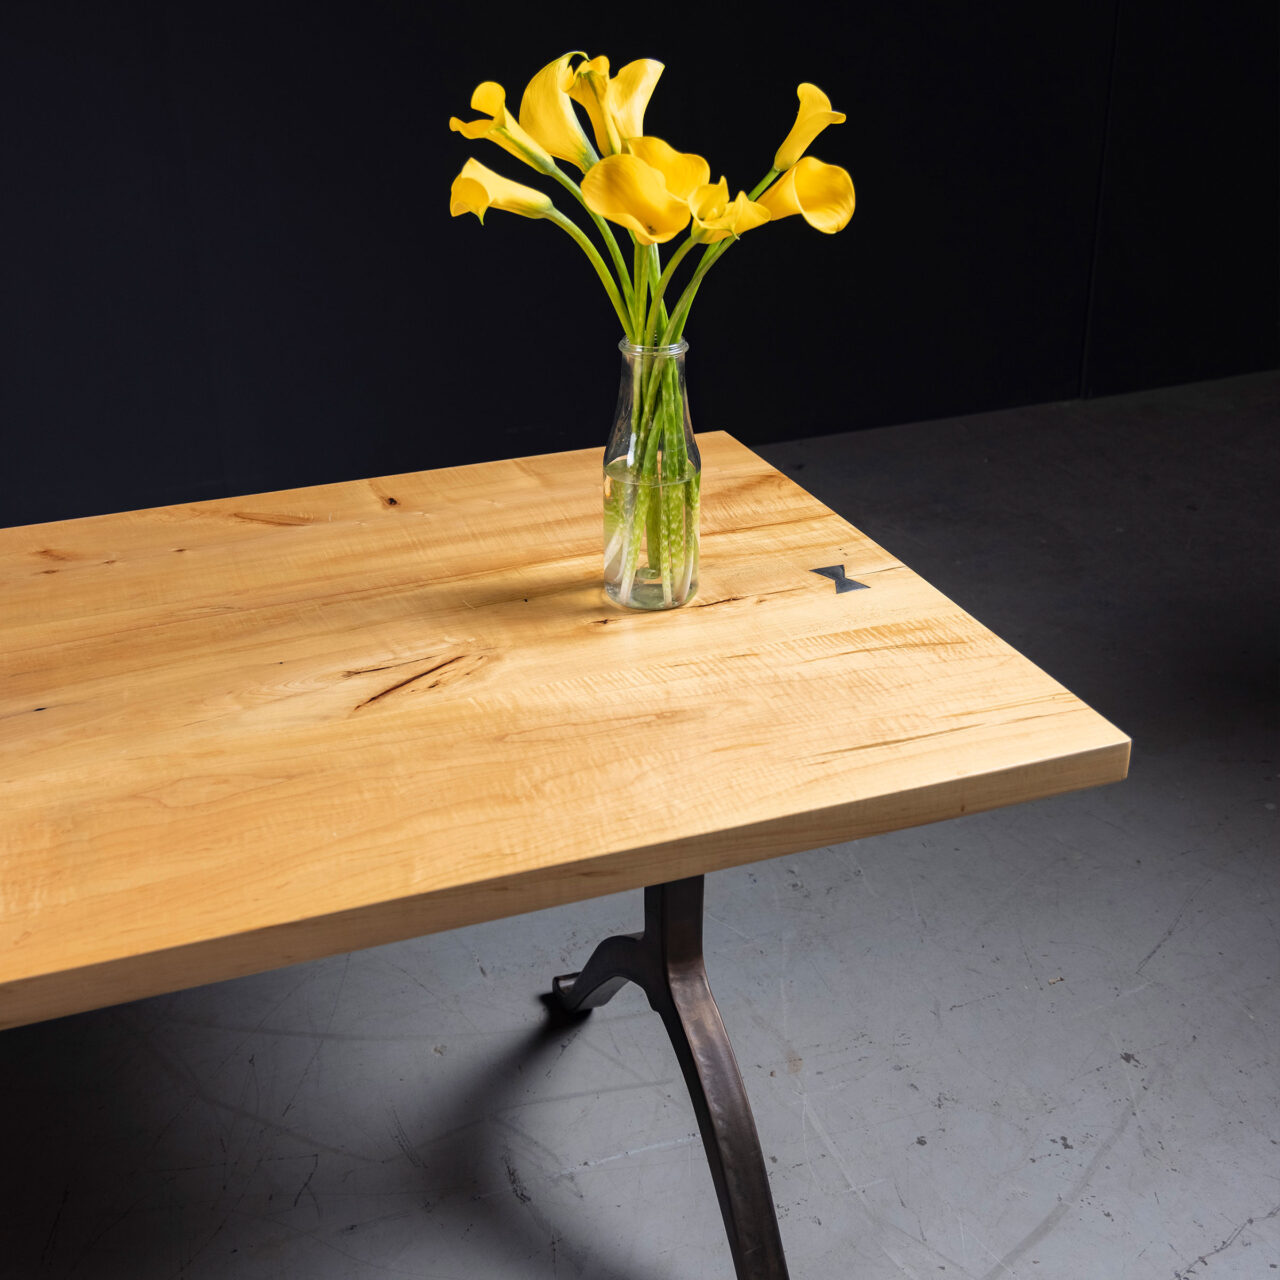 SENTIENT Furniture presents a light wood, maple, communal table featuring a minimalist design. A clear glass vase with bright yellow flowers adds a pop of color to the scene, complemented by the industrial-style metal table leg.